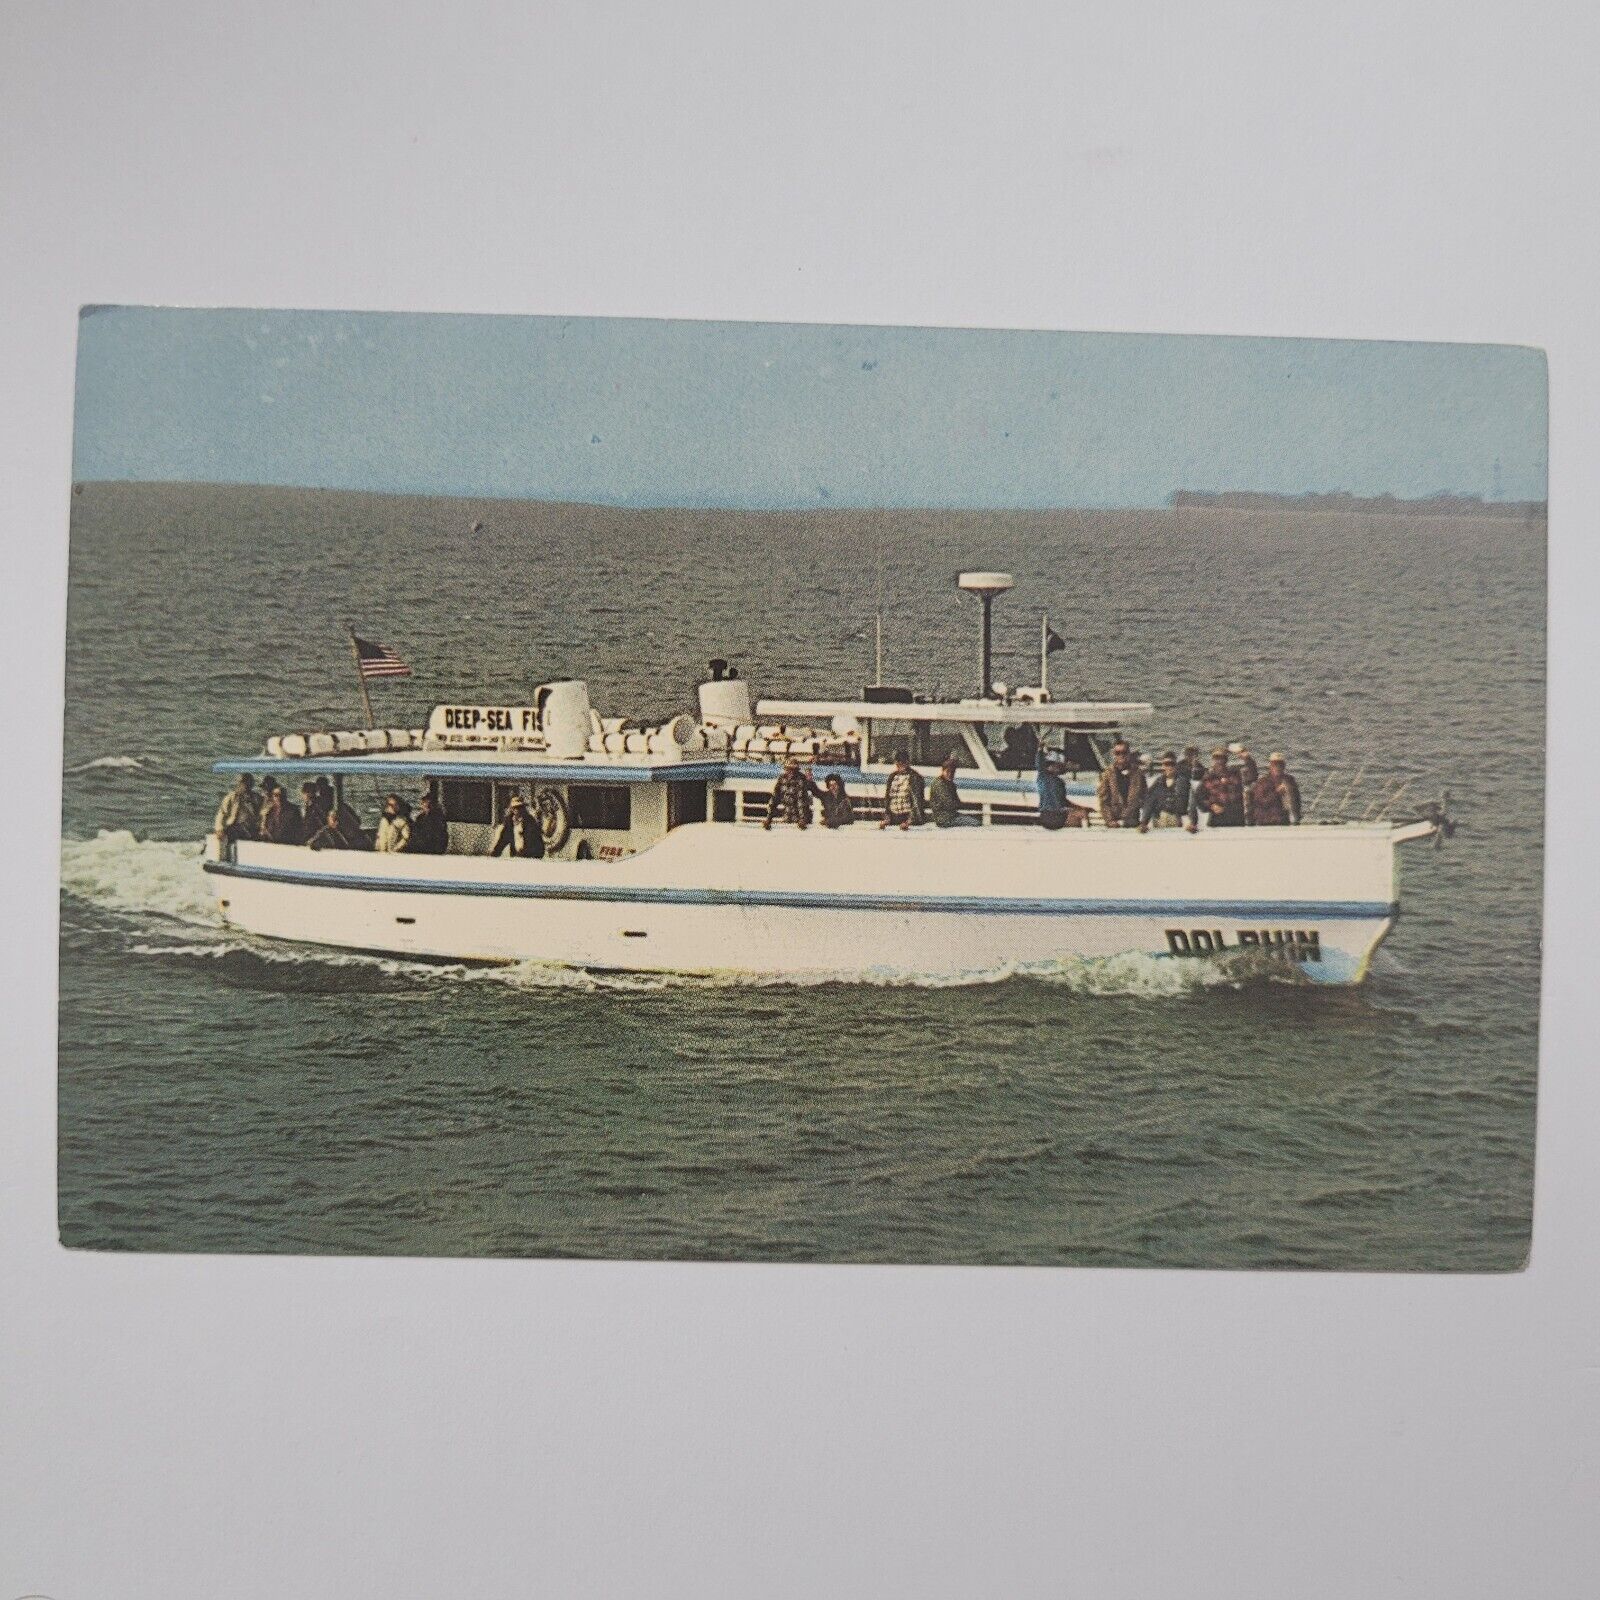 Dolphin 65 Ft Party Fishing Boat Florida Gulf Of Mexico Vintage Chrome Postcard